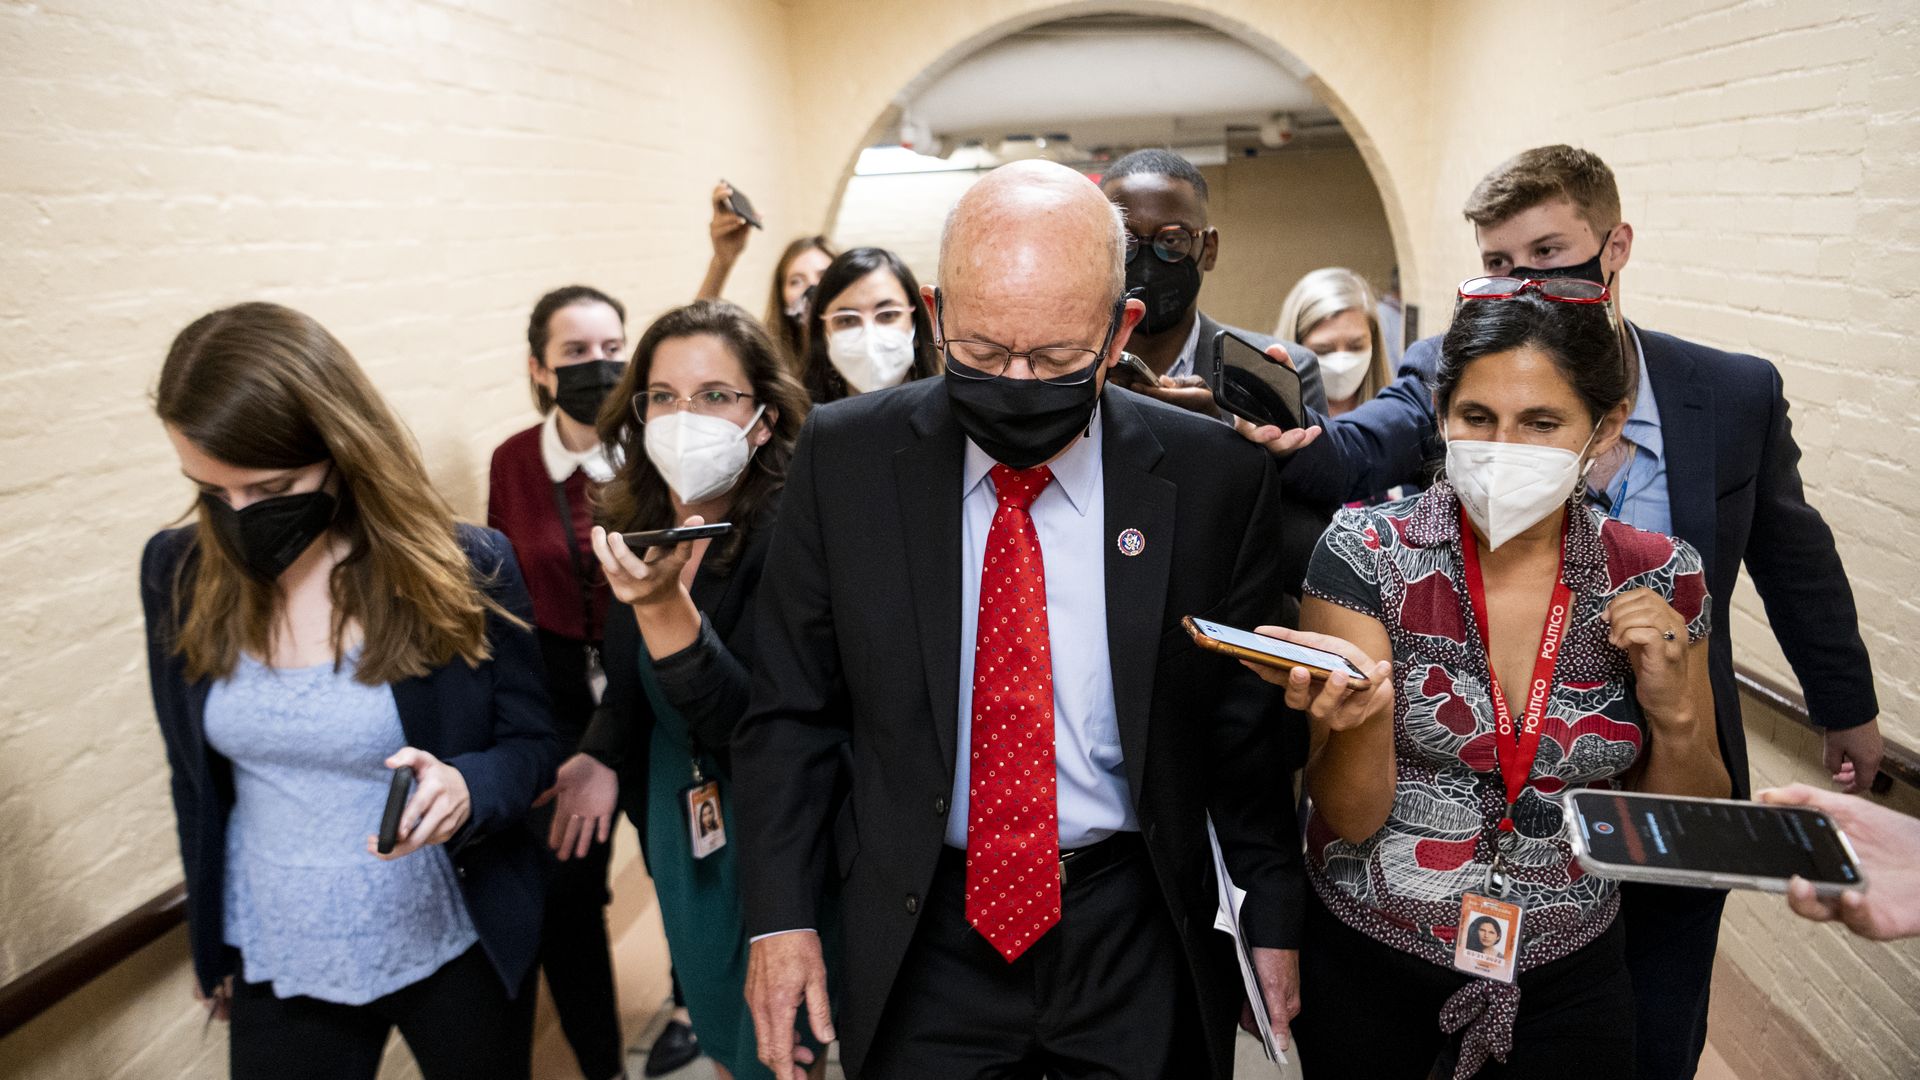 Rep. Peter DeFazio is seen surrounded by reporters after a meeting of the House Democratic caucus on Monday.